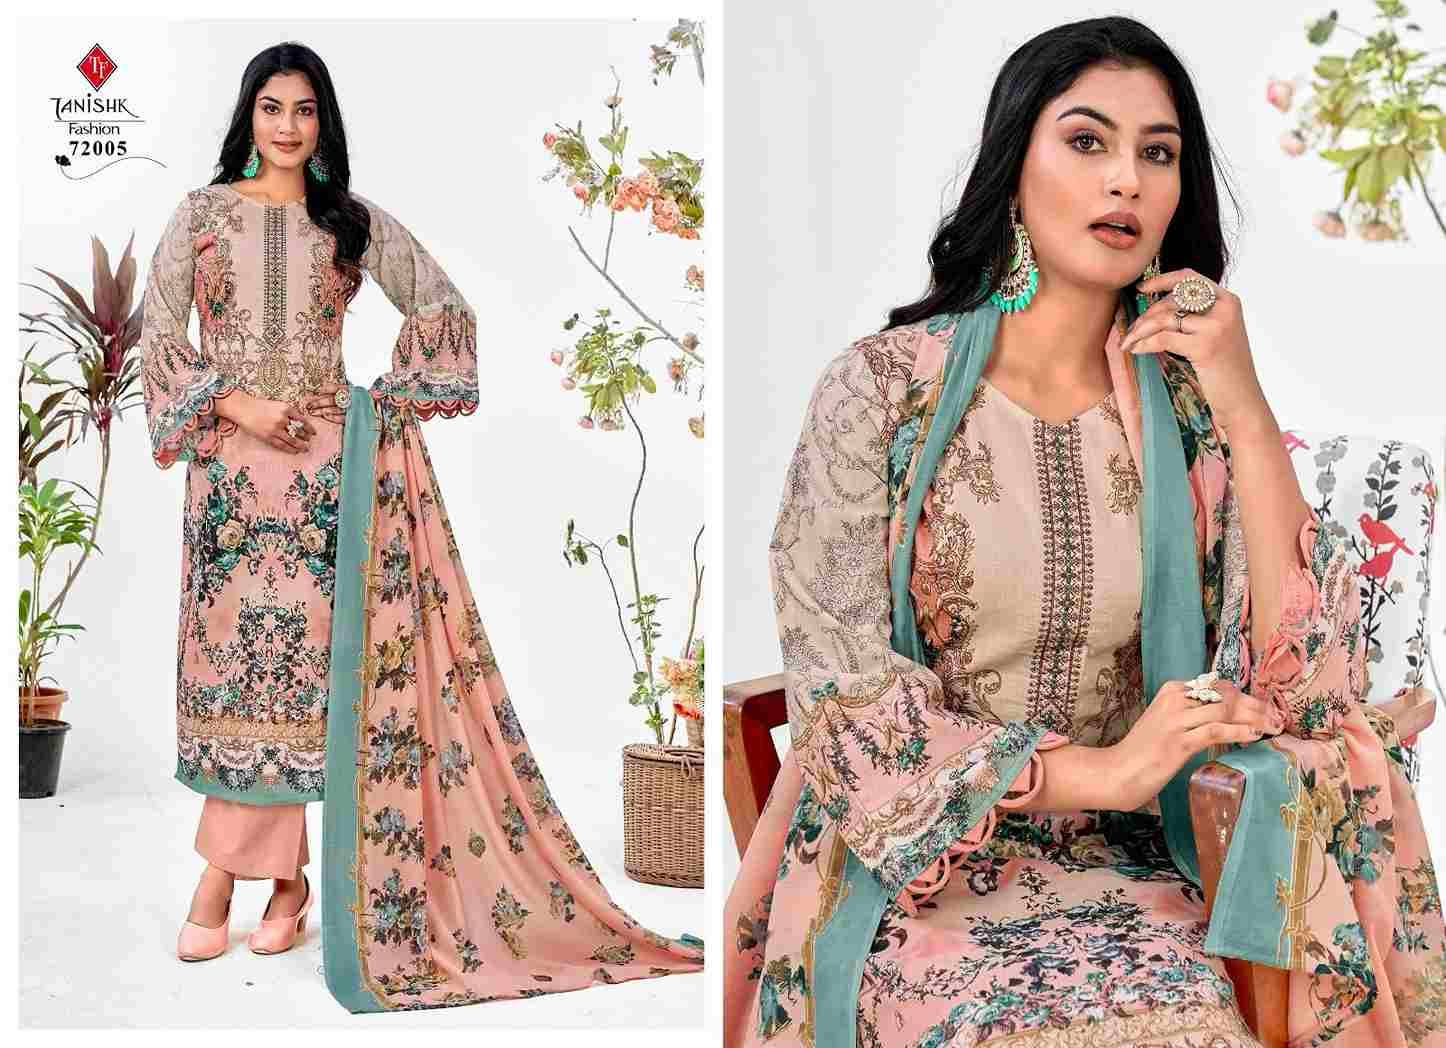 Mehraaz Vol-6 By Tanishk Fashion 72001 To 72008 Series Beautiful Festive Suits Colorful Stylish Fancy Casual Wear & Ethnic Wear Pure Cambric Cotton Print Dresses At Wholesale Price